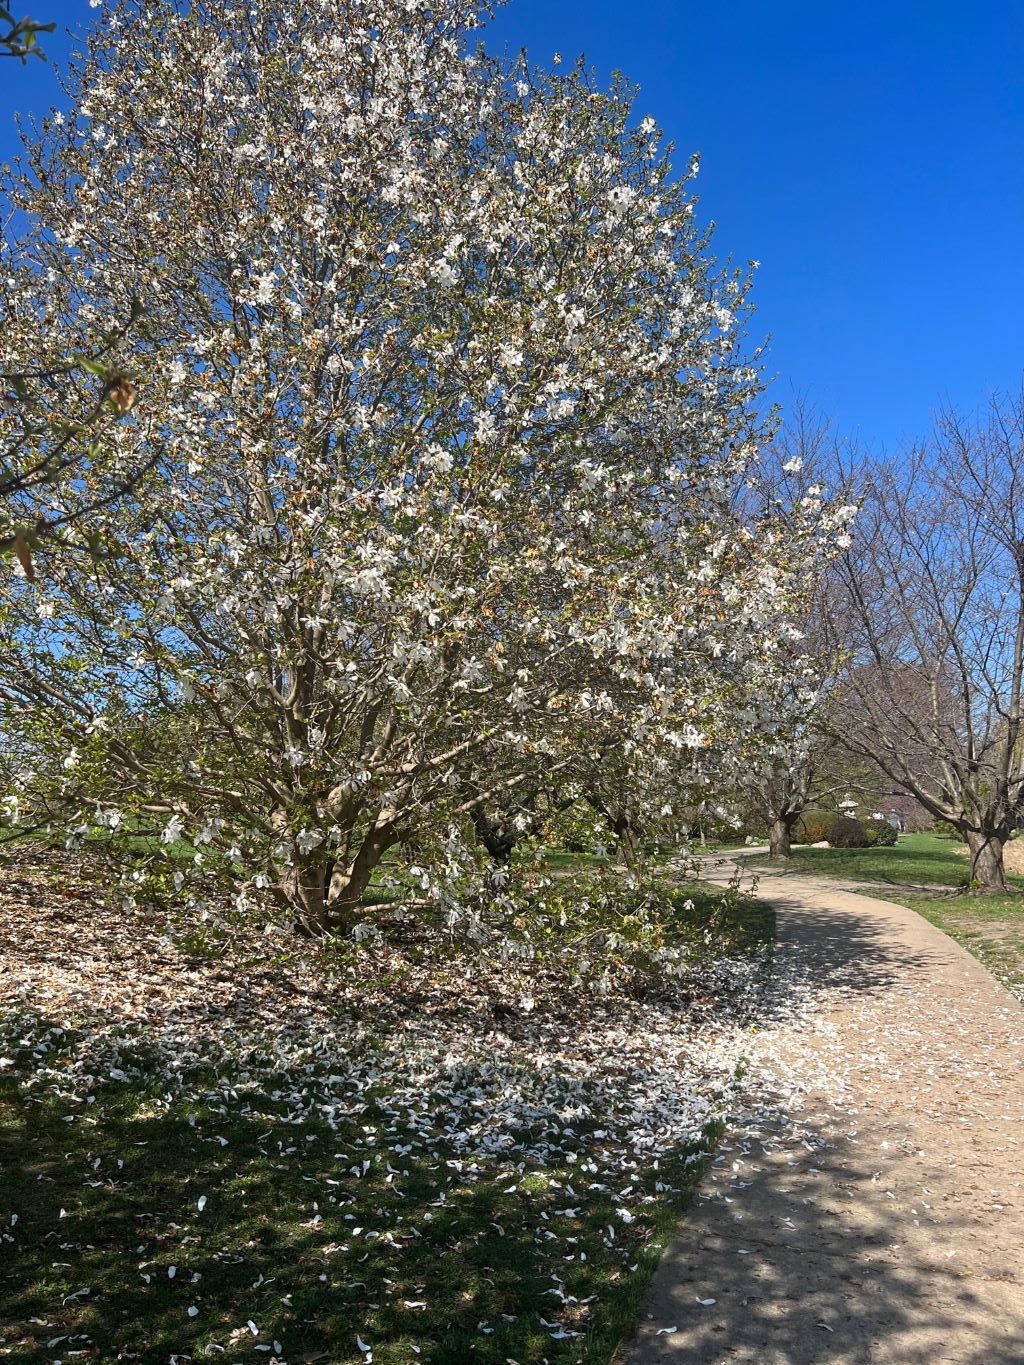 A large flowering tree with white petals. There are white petals scattered around the base of the tree, and a path that runs alongside it.